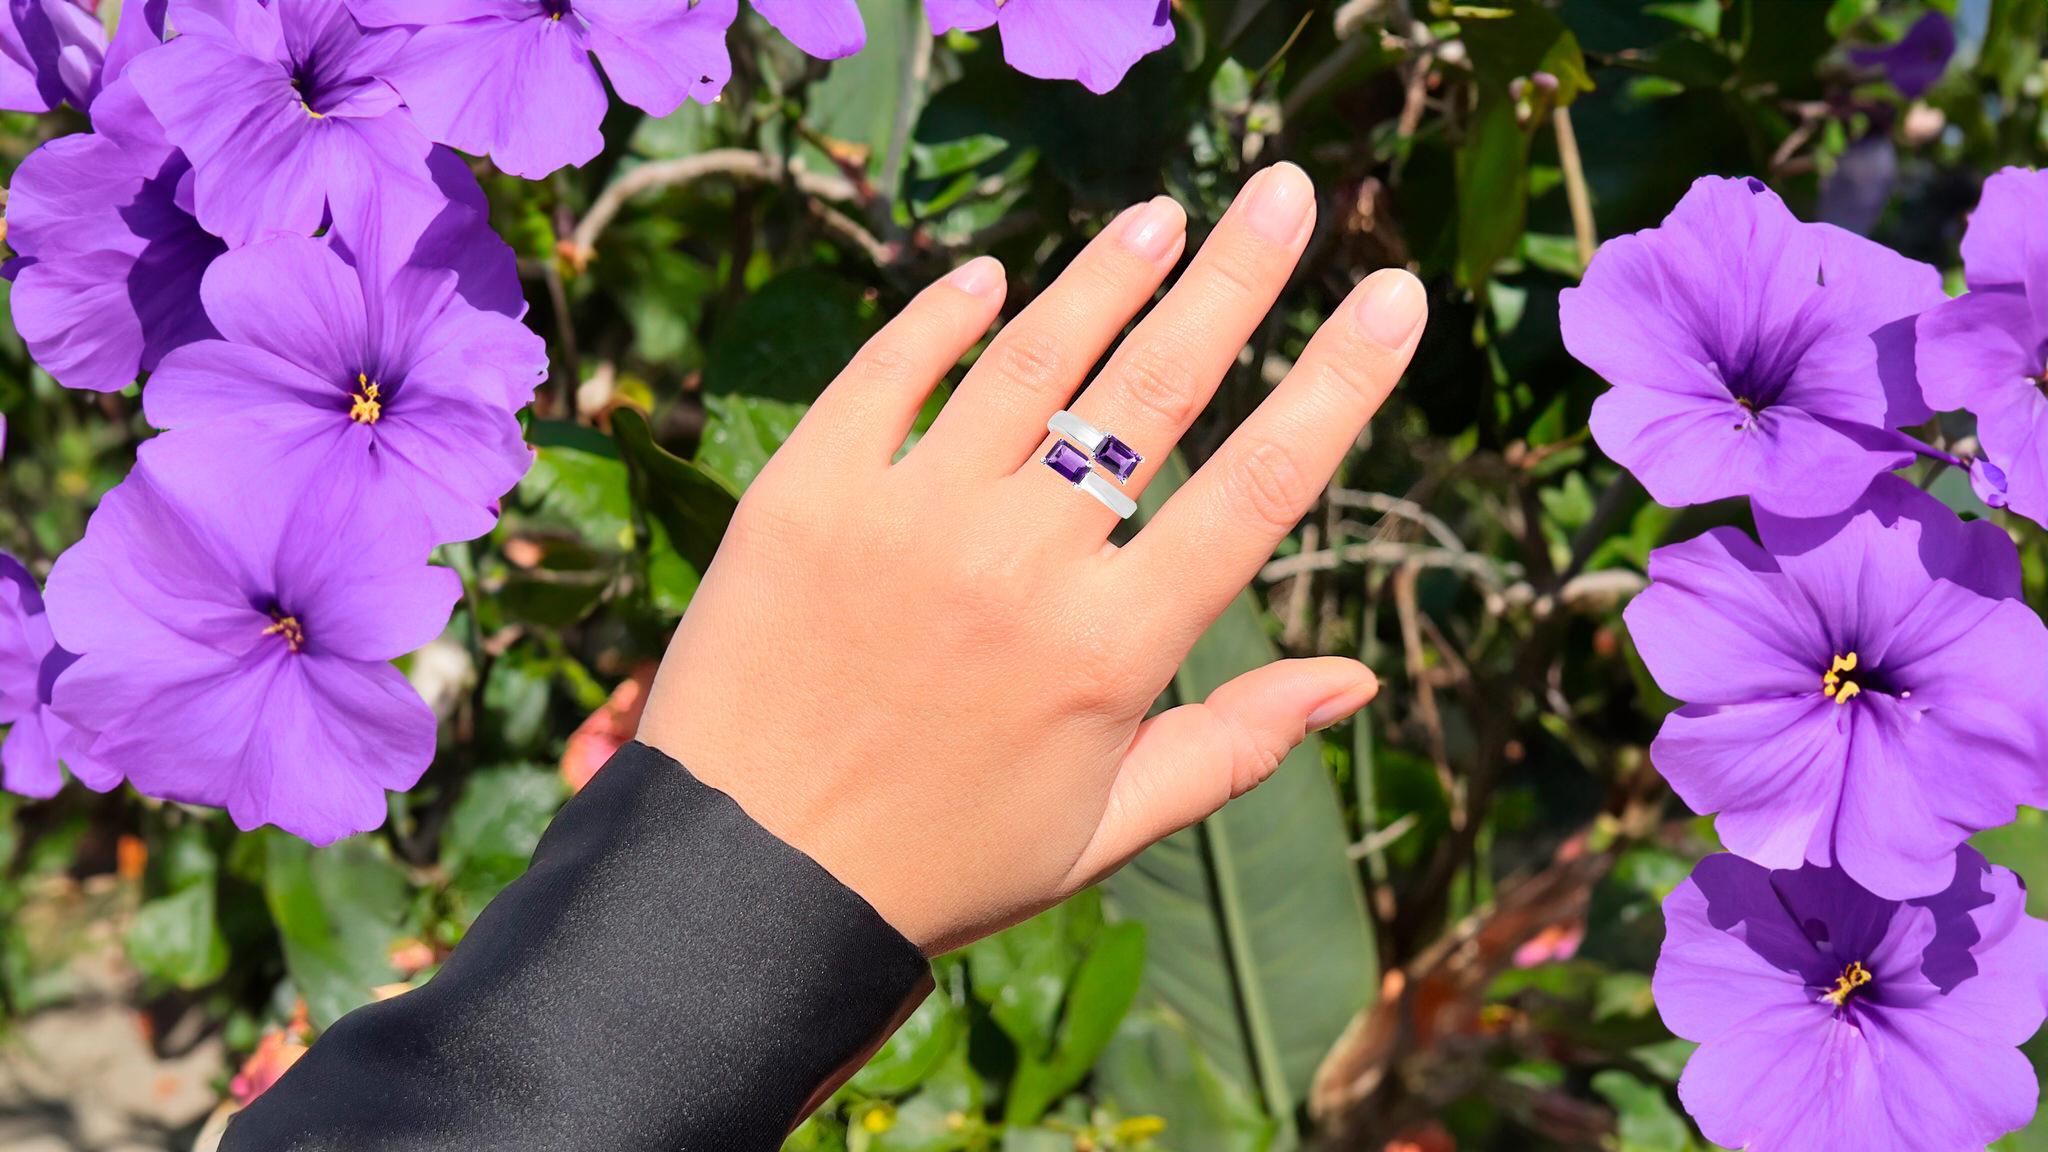 It comes with the Gemological Appraisal by GIA GG/AJP
All Gemstones are Natural
2 Amethysts = 2.04 Carats
Metal: Rhodium Plated Sterling Silver
Ring Size: 9* US
*It can be resized complimentary